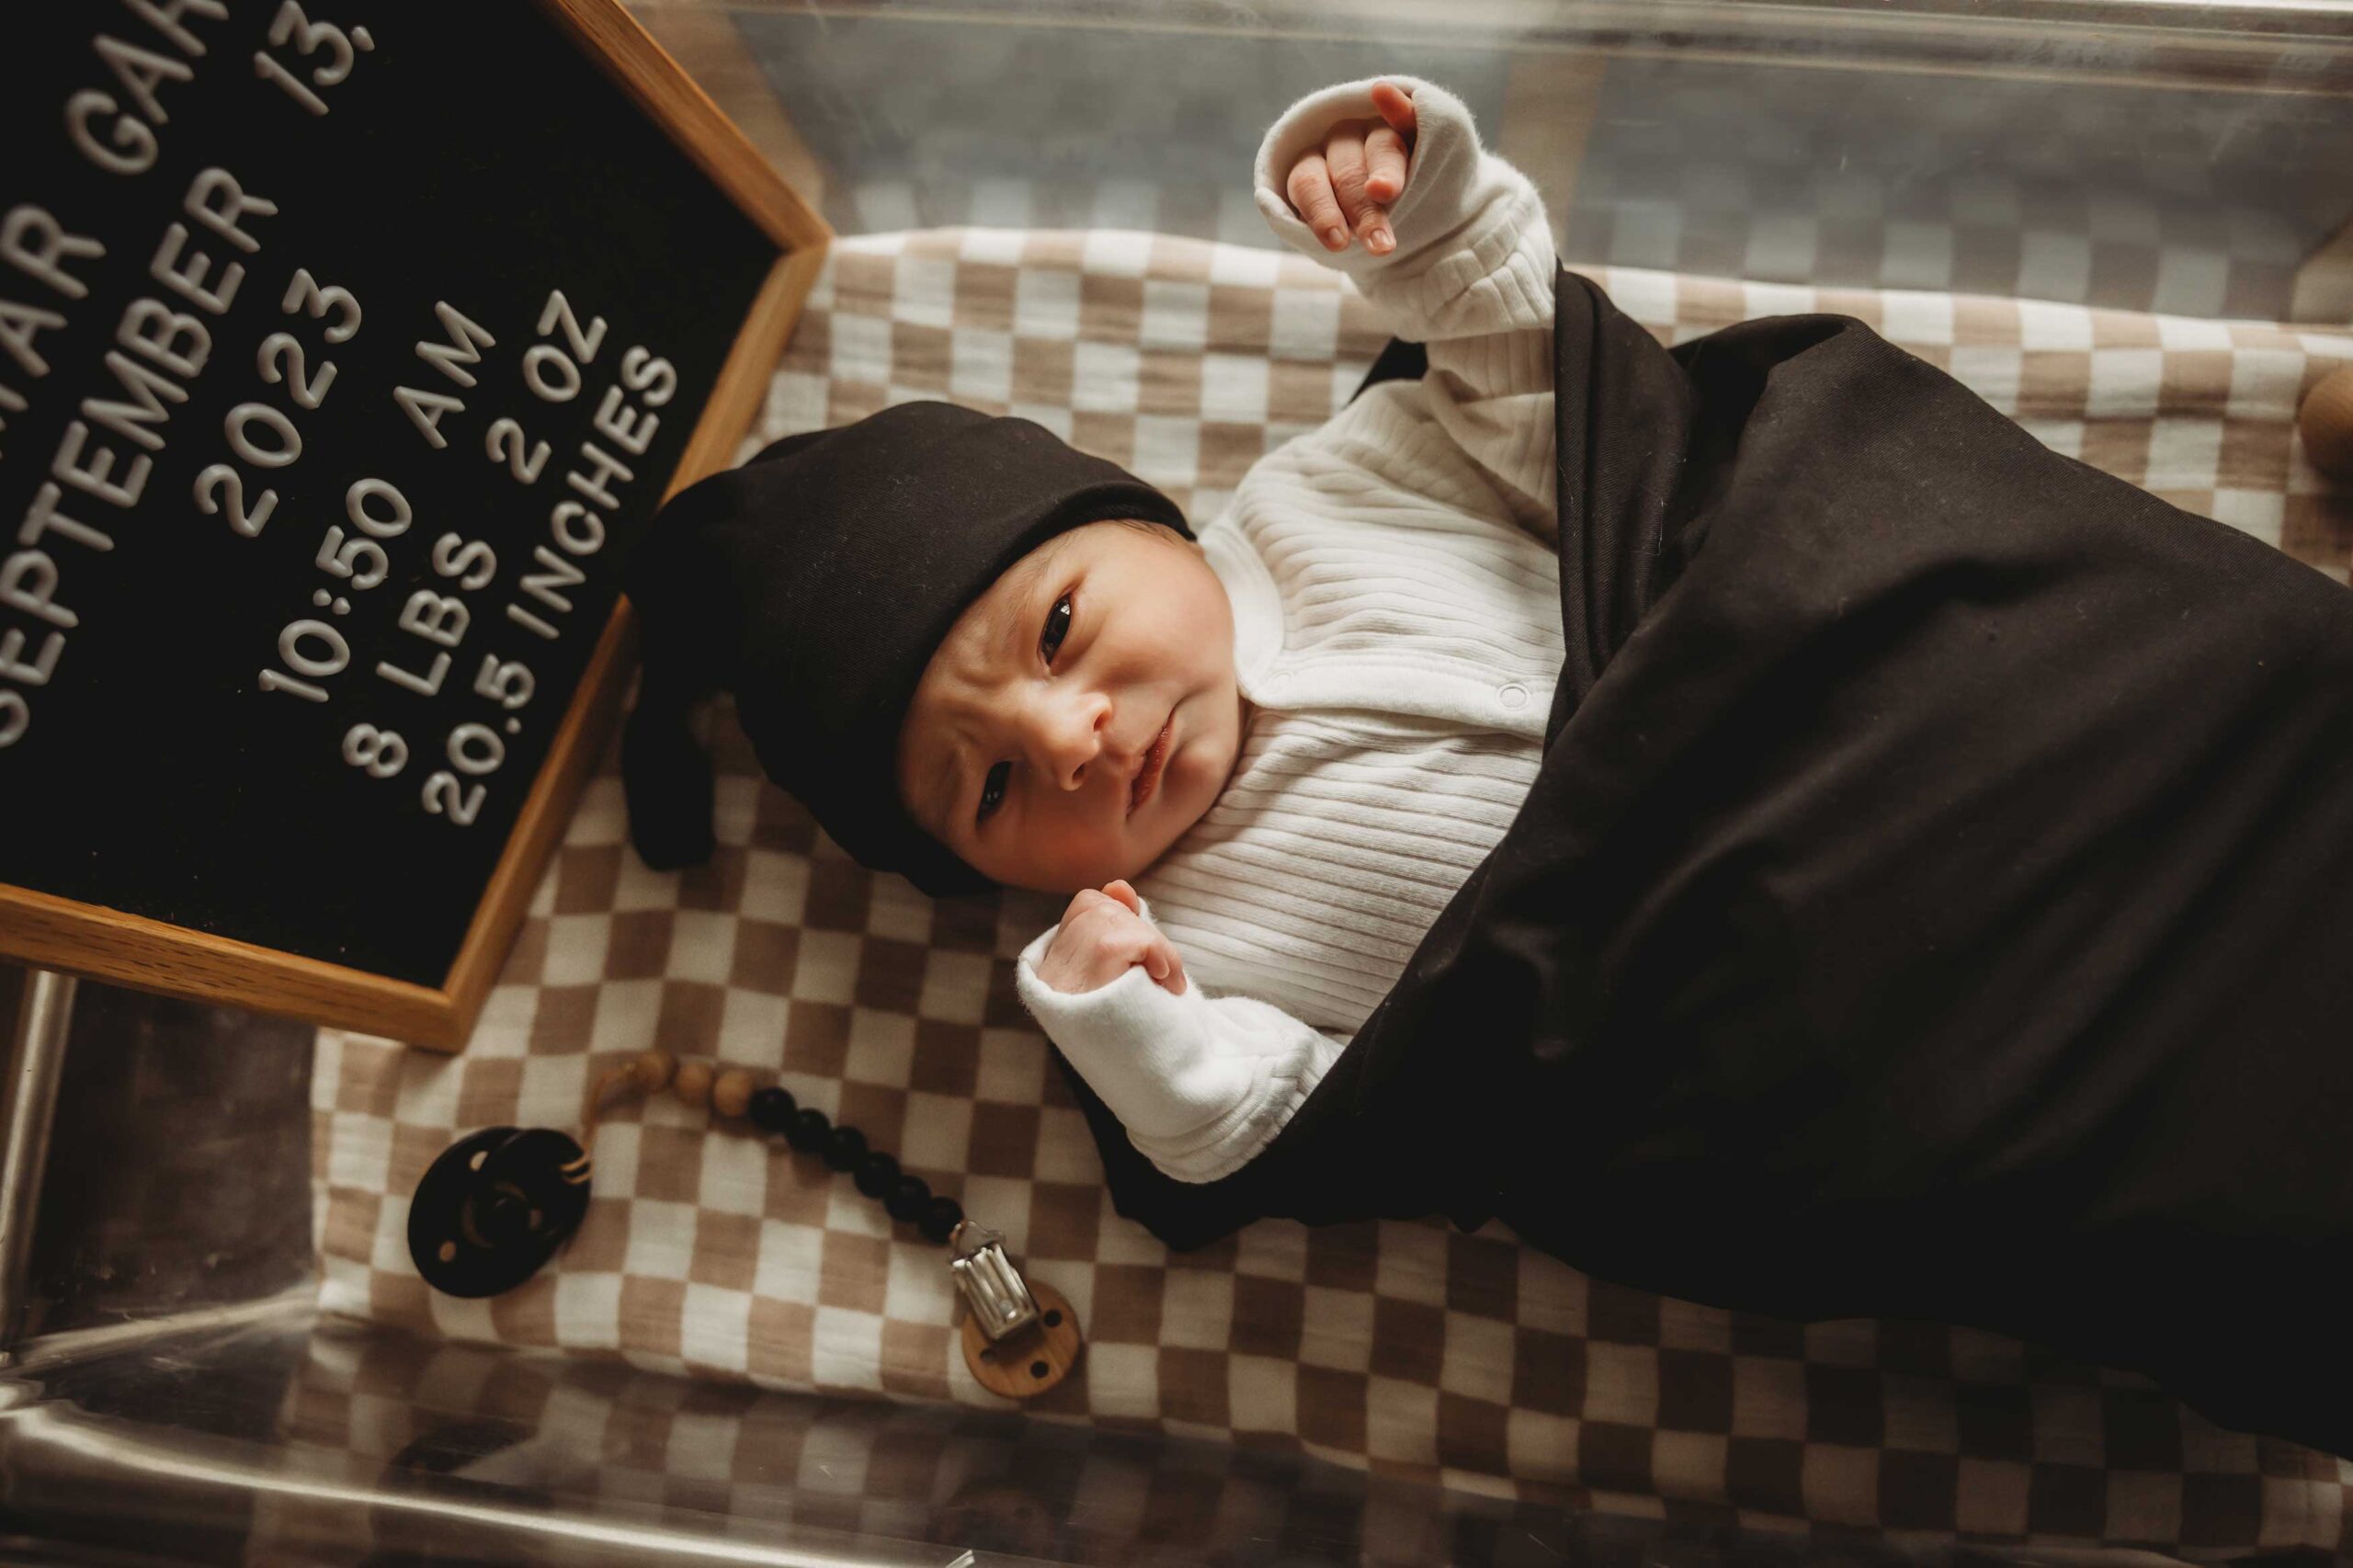 newborn baby looking peaceful in his hospital crib wrapped in a black blanket